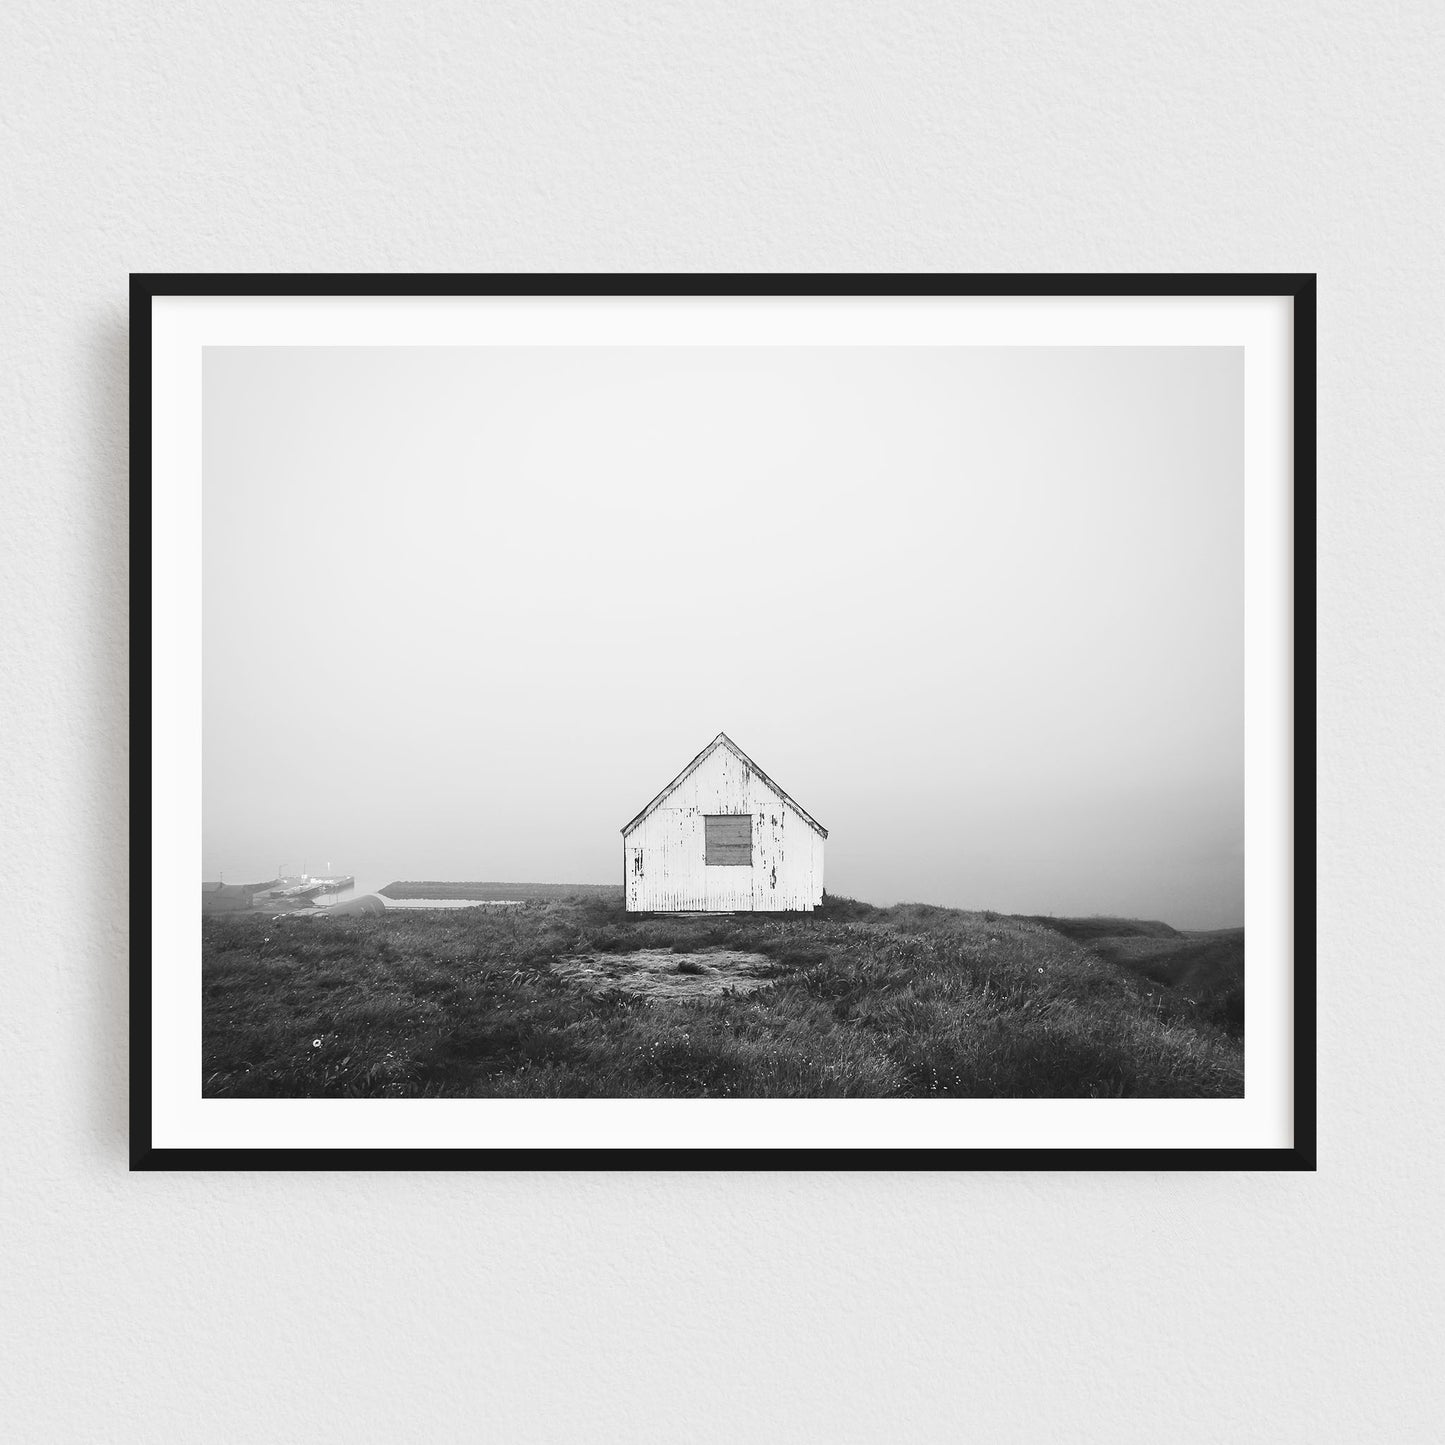 Black And White Iceland Landscape Photography Print - Old Rustic Cabin